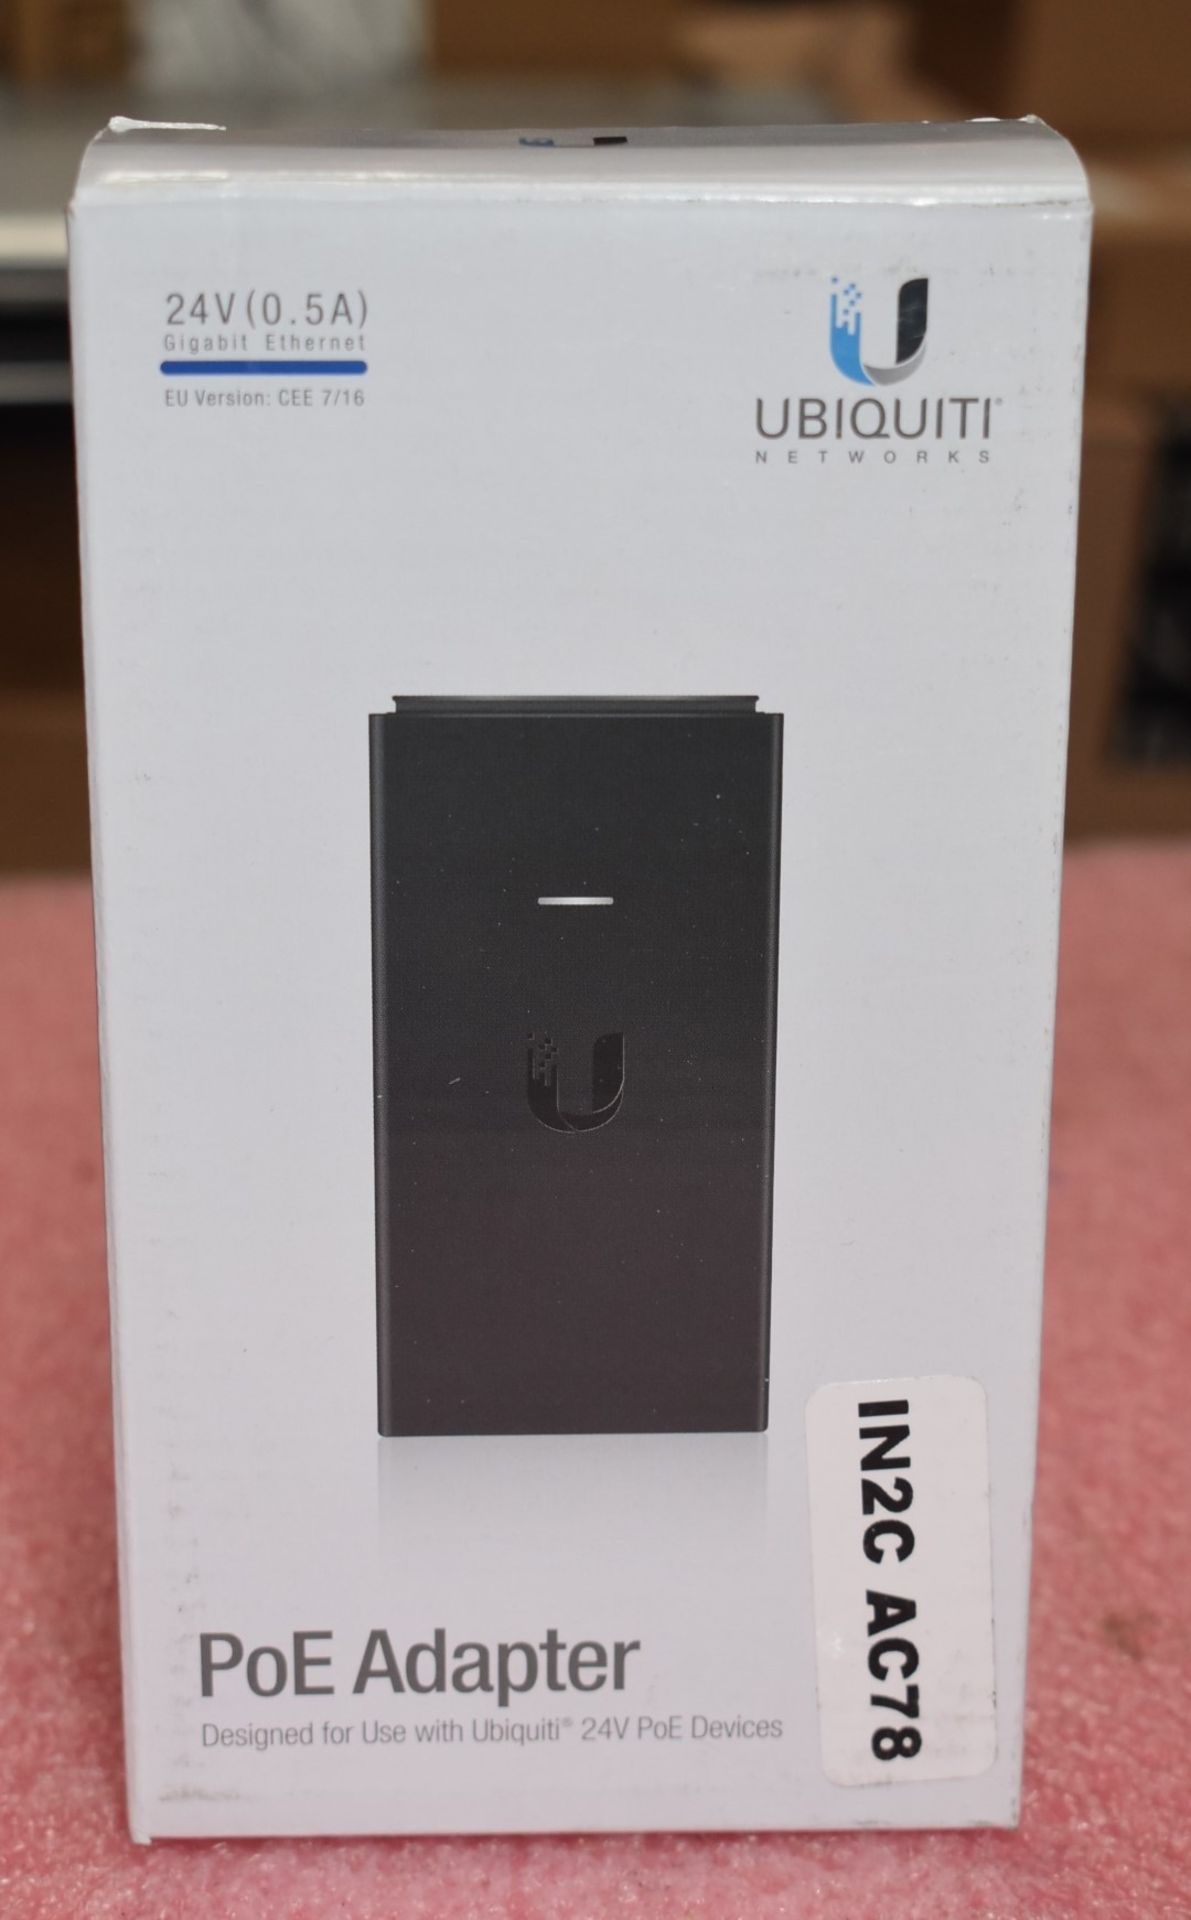 1 x Ubiquiti Gigabit Passive Power Over Ethernet PoE Injector - 24V 0.5A - New Boxed Stock